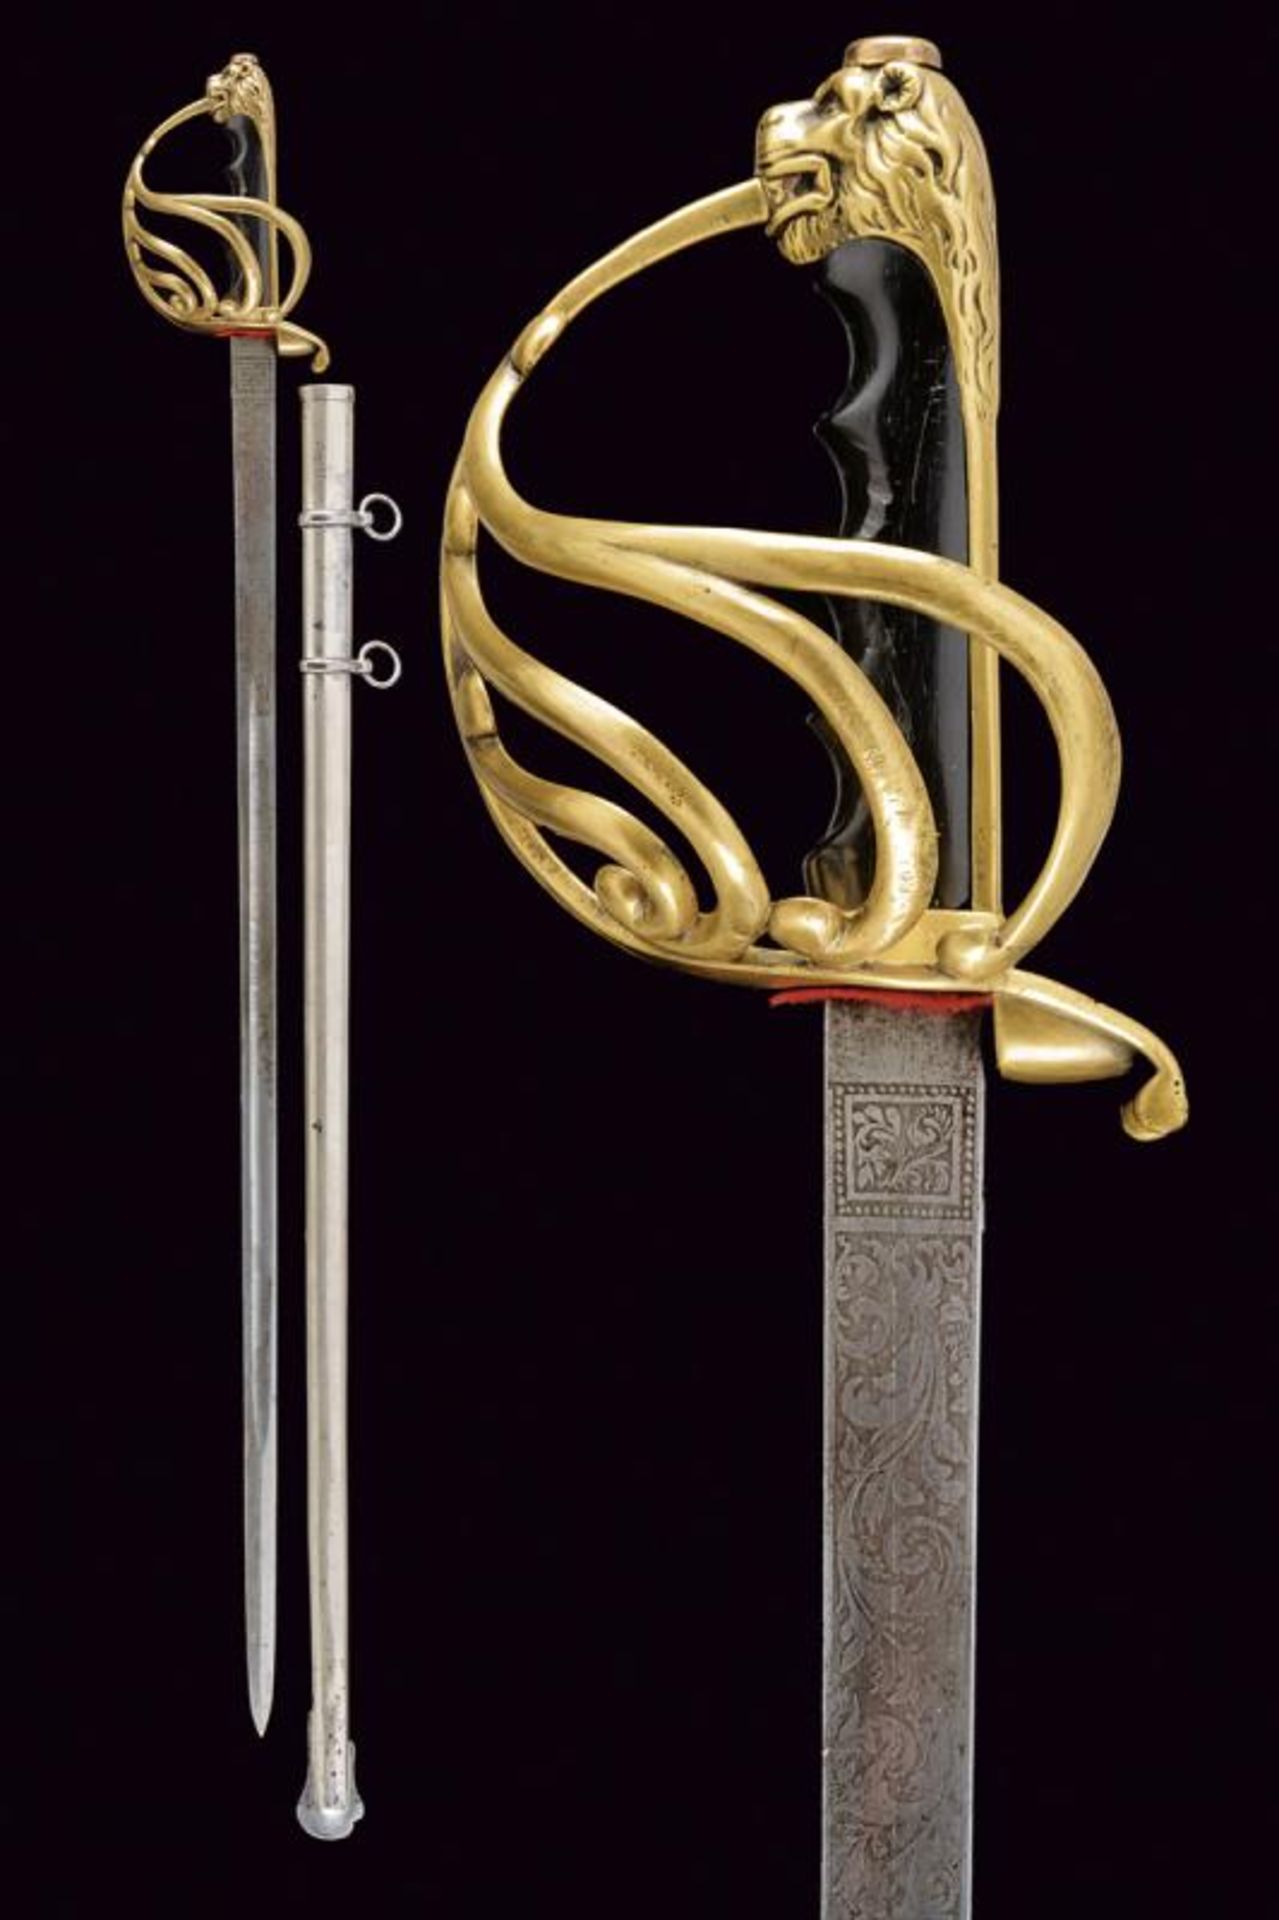 A 'Bersagliere' officer's sabre with non-regulation Unification period blade